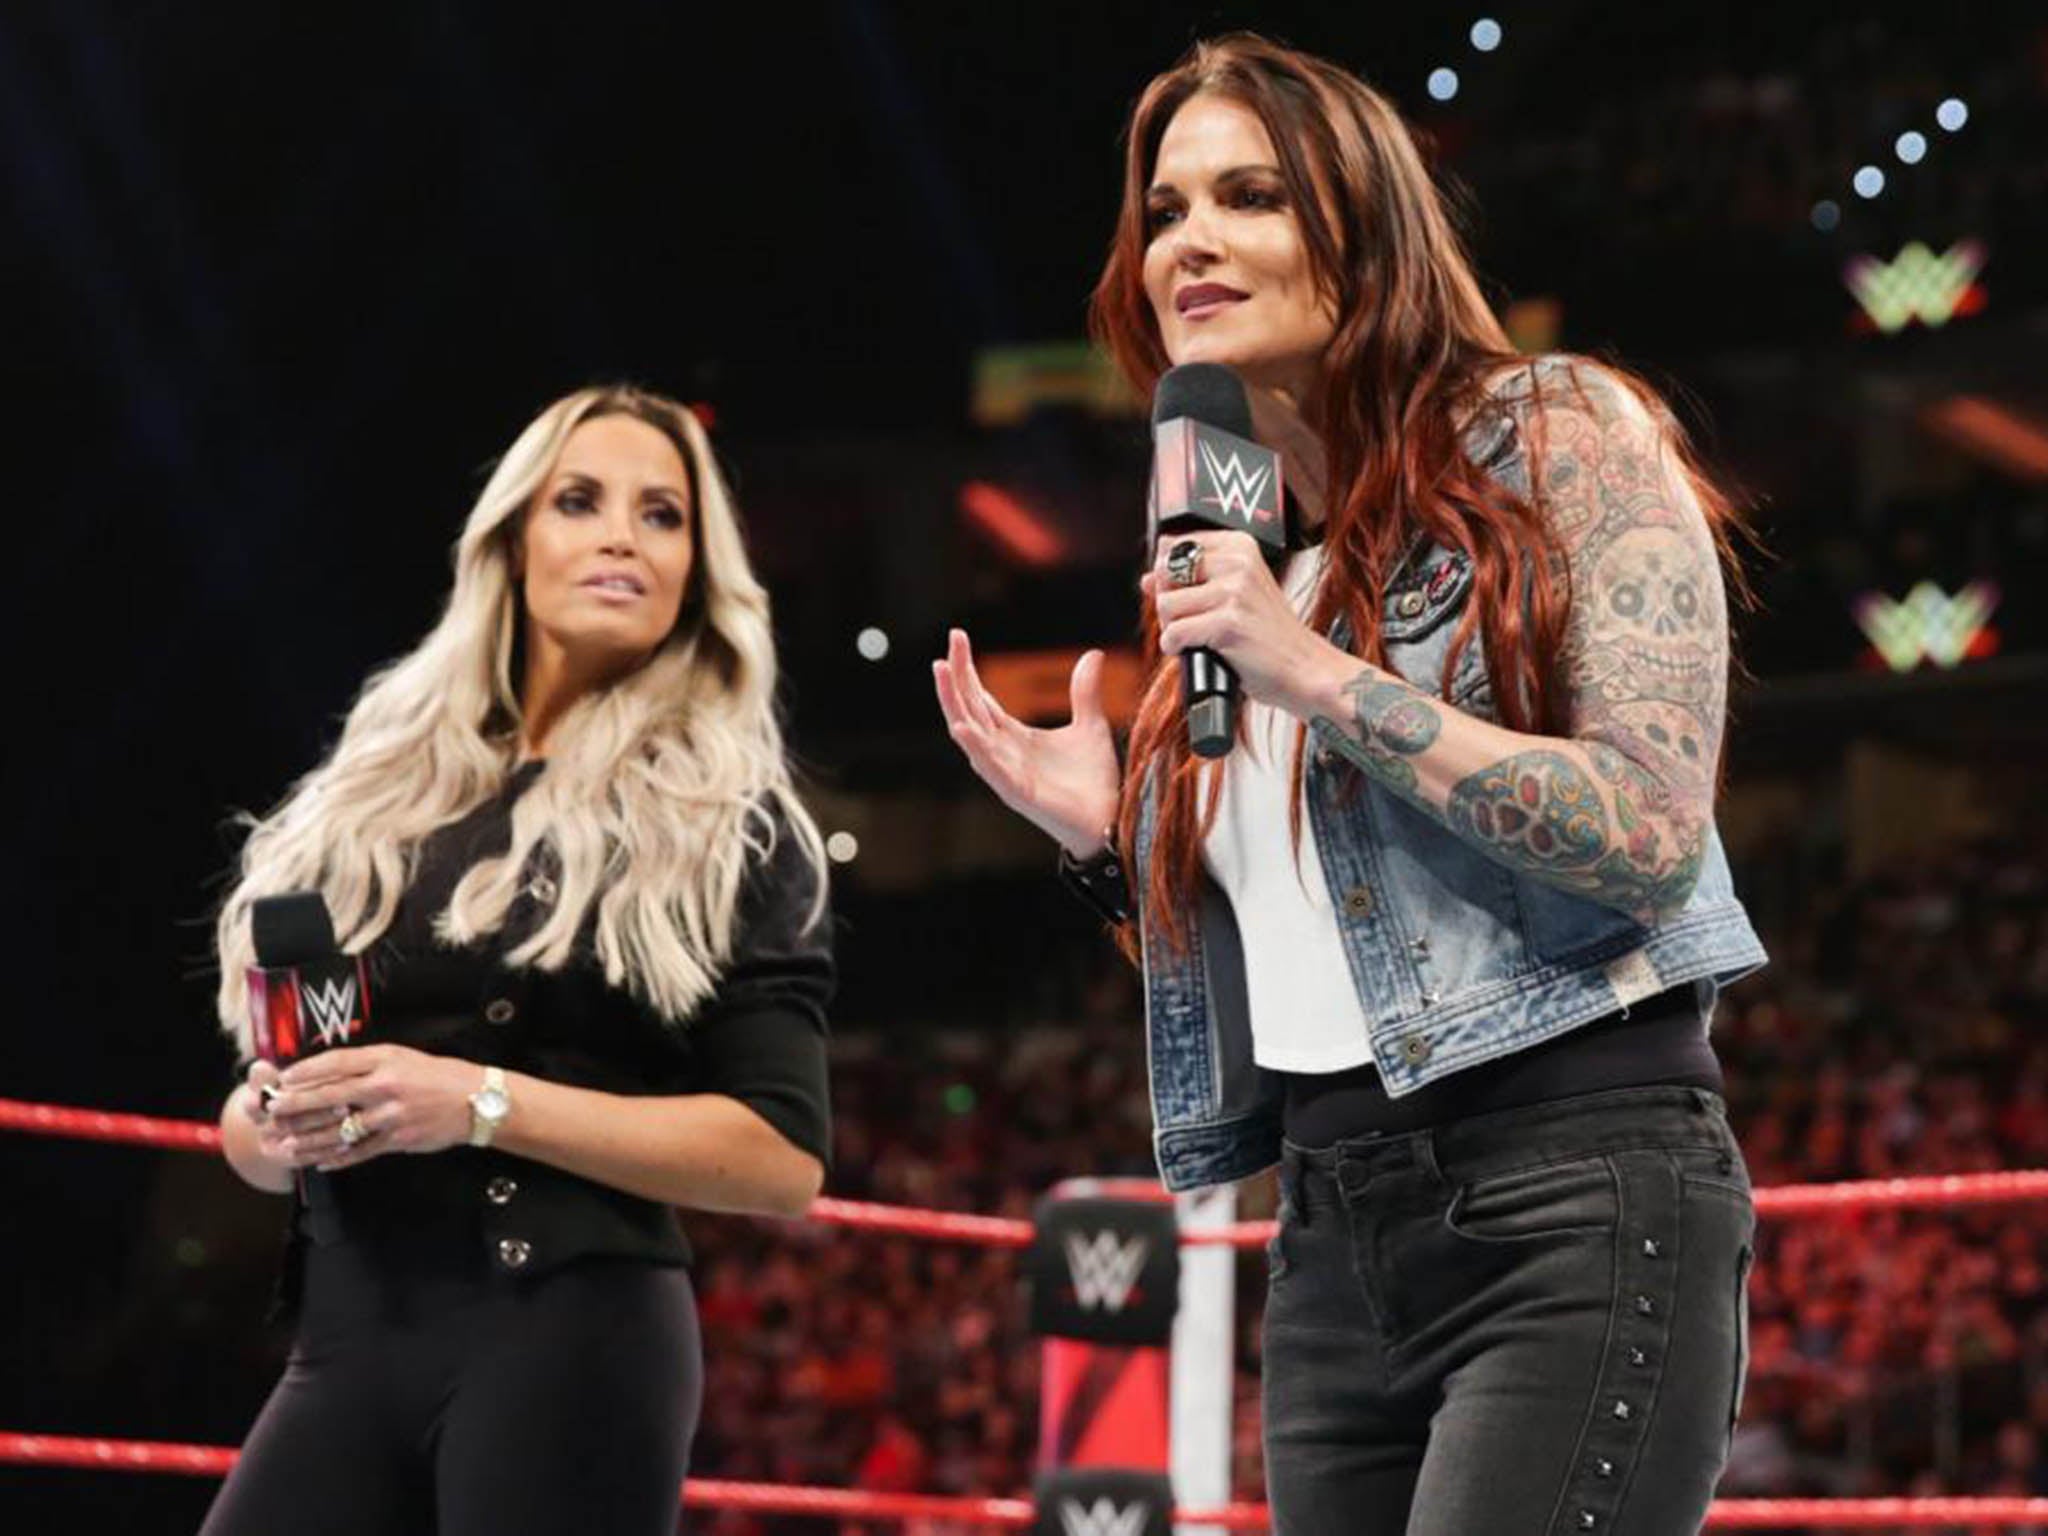 WWE Hall of Fame duo Lita and Trish Stratus will feature at Evolution